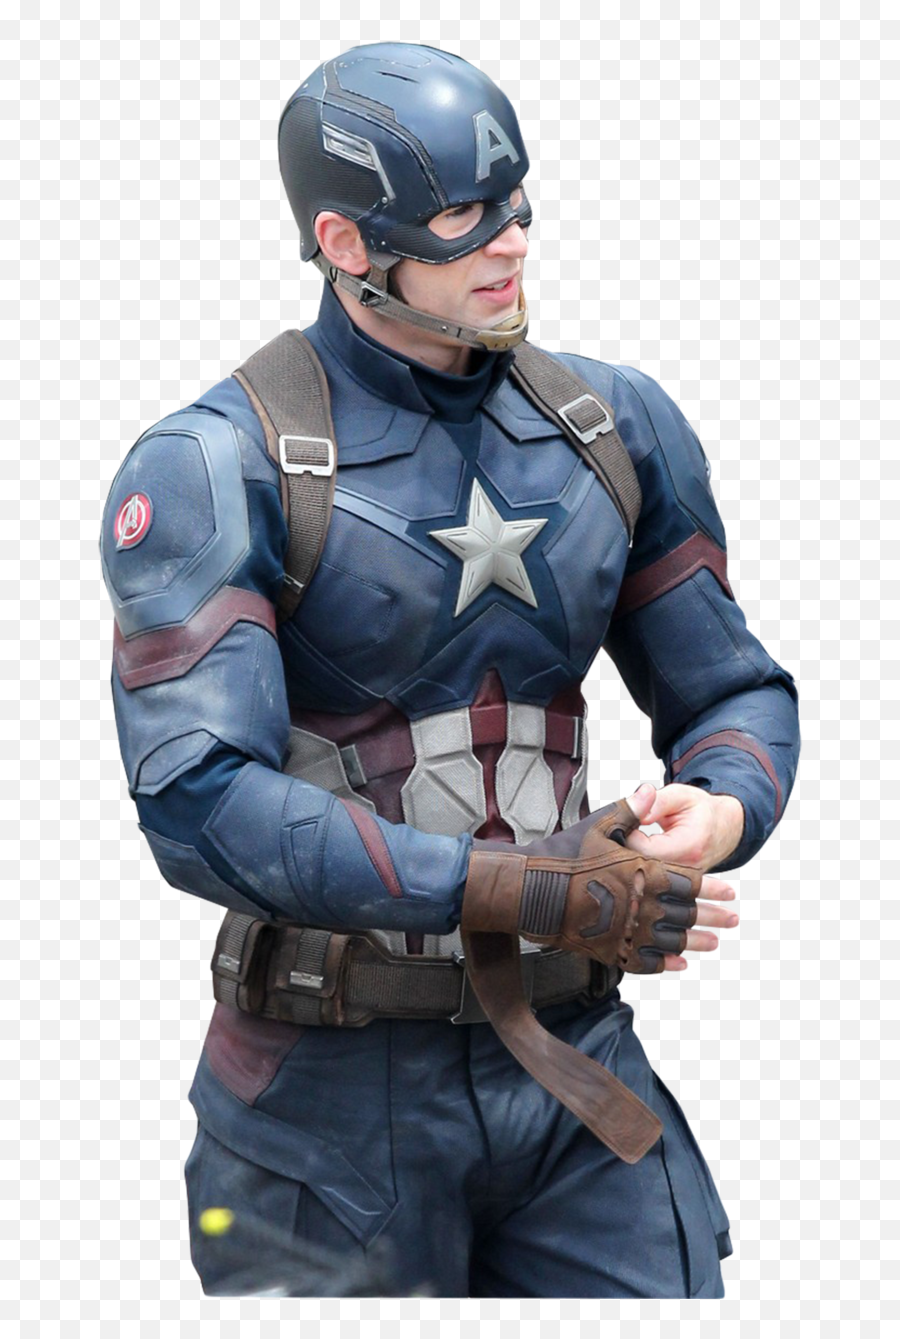 Free Png Captain America Png Images Transparent - Complete Emoji,Captain America Shield Transparent